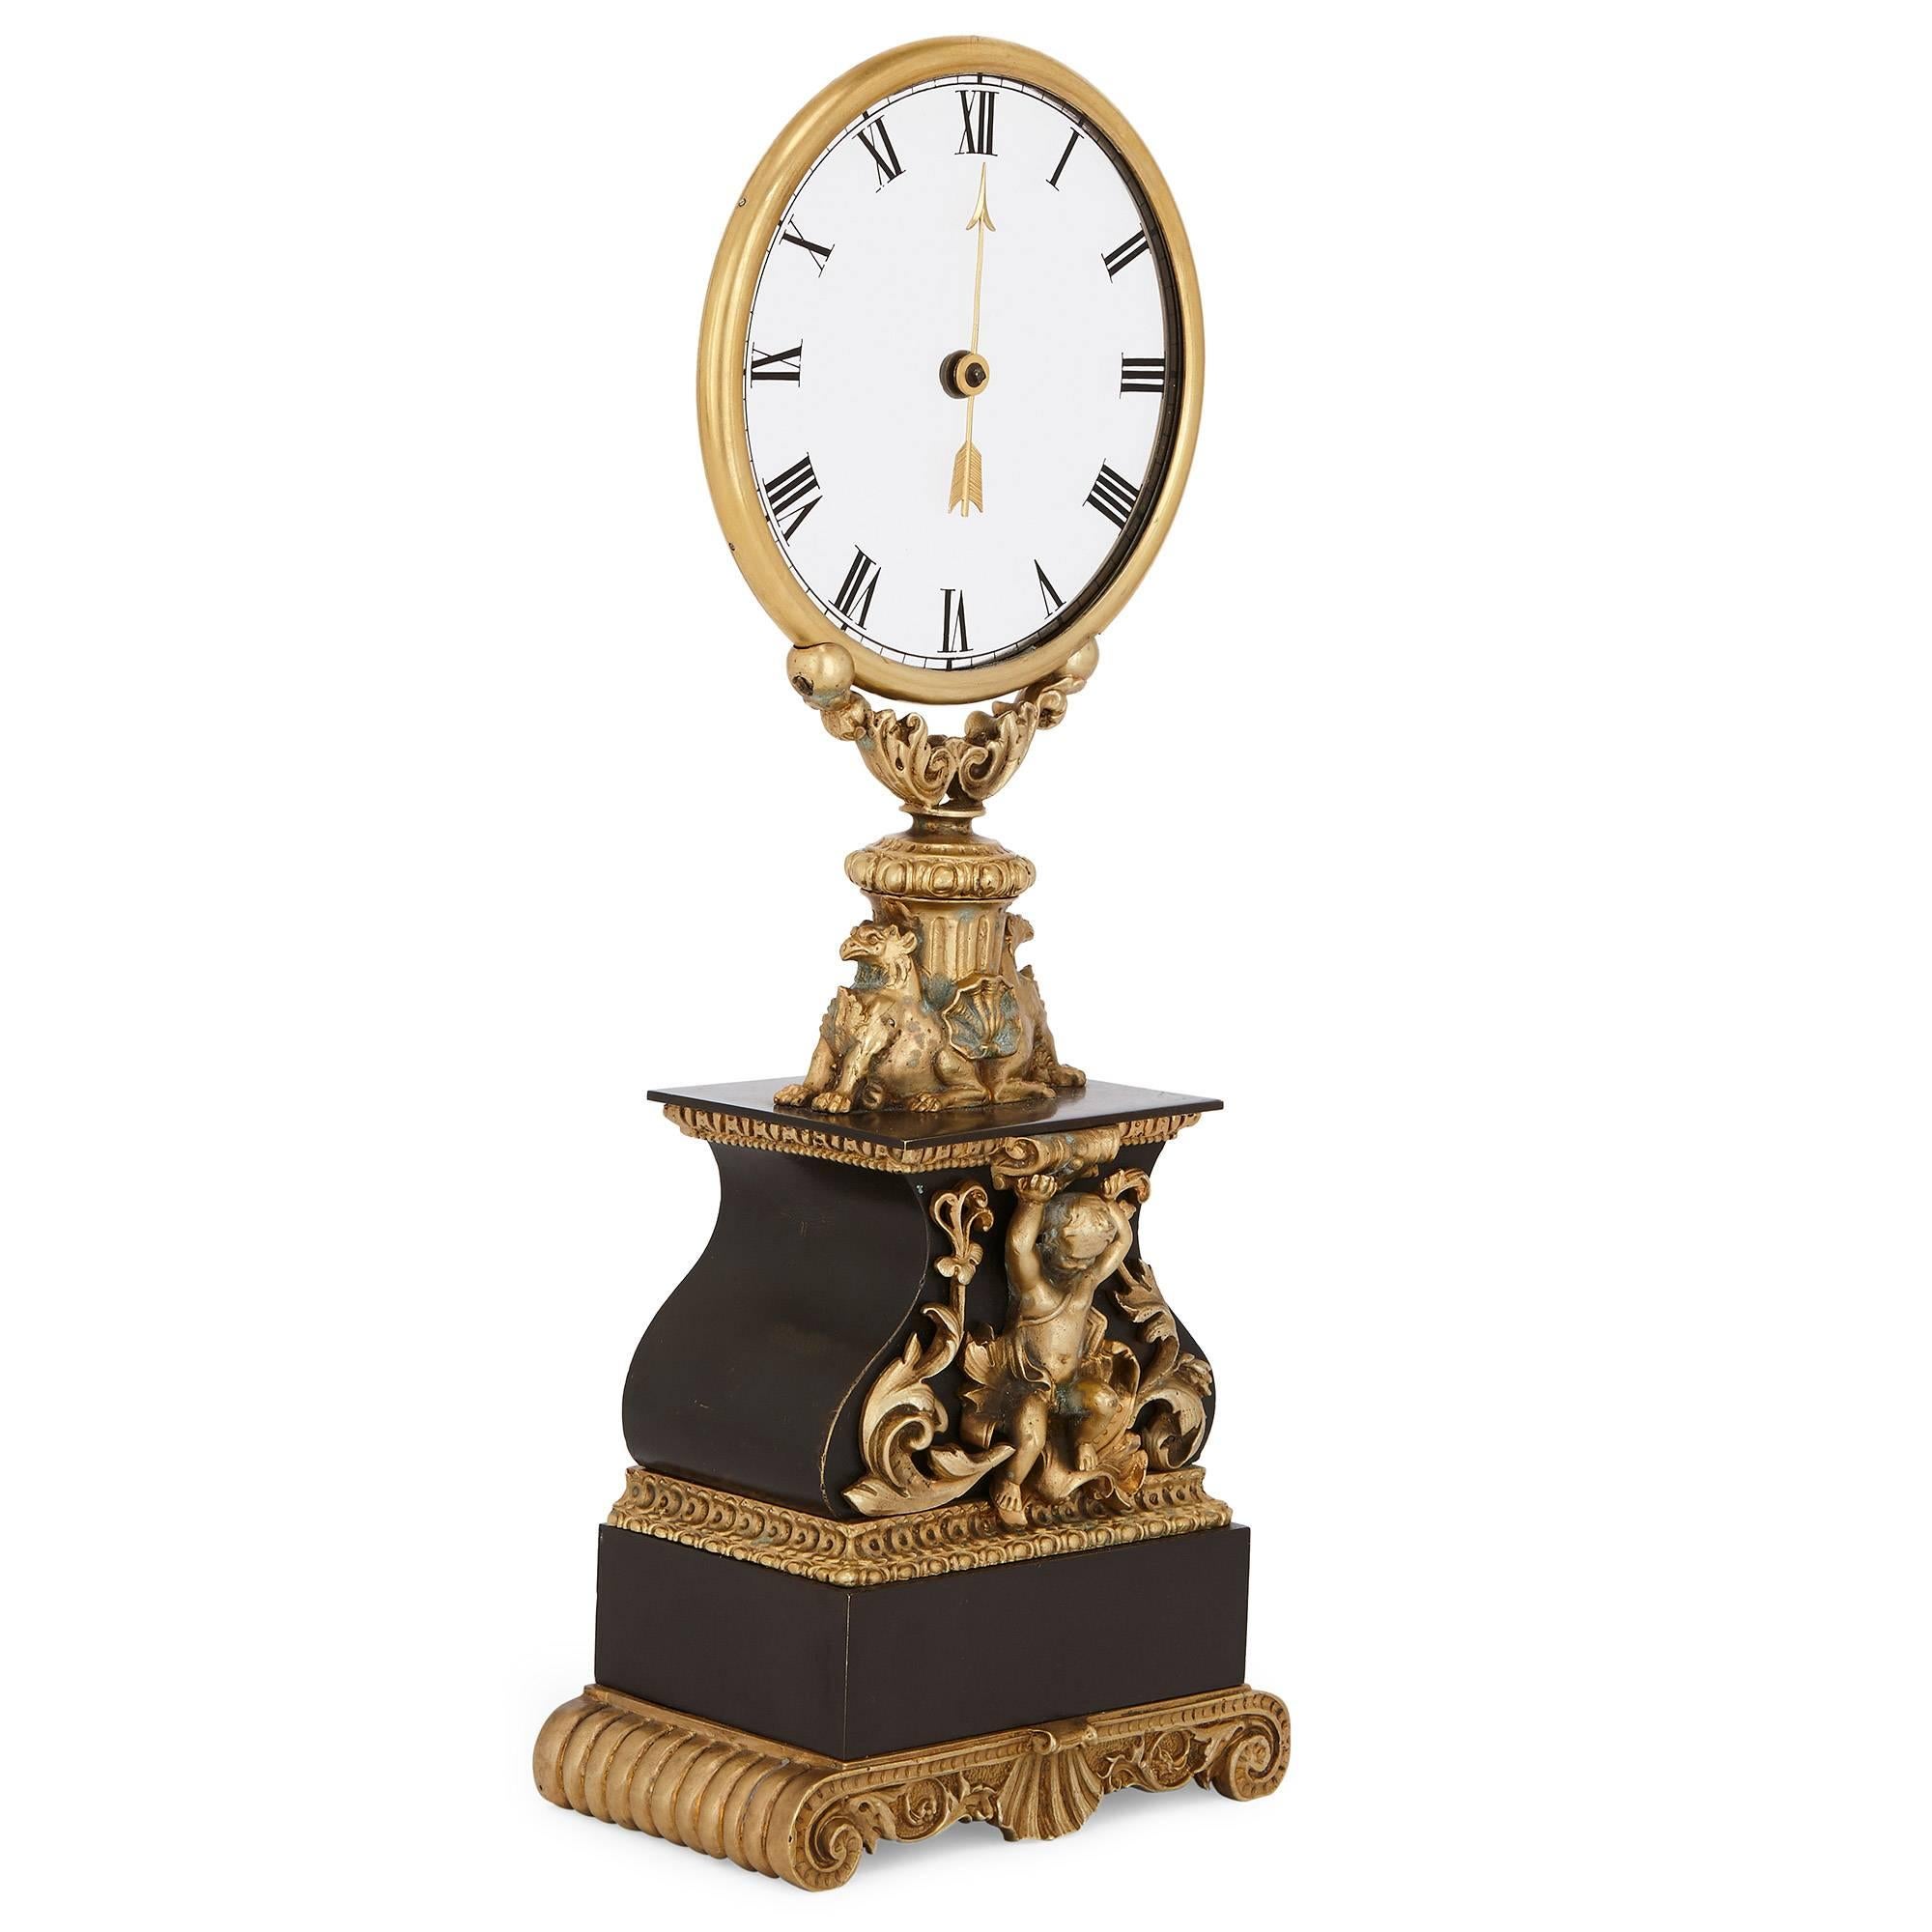 This is an exceptional and rare clock by the famous French magician and inventor of the 'mystery clock' mechanism, Jean Eugene Robert-Houdin (French, 1805-1871). Robert-Houdin worked in Paris during the 19th Century and is often considered to be the